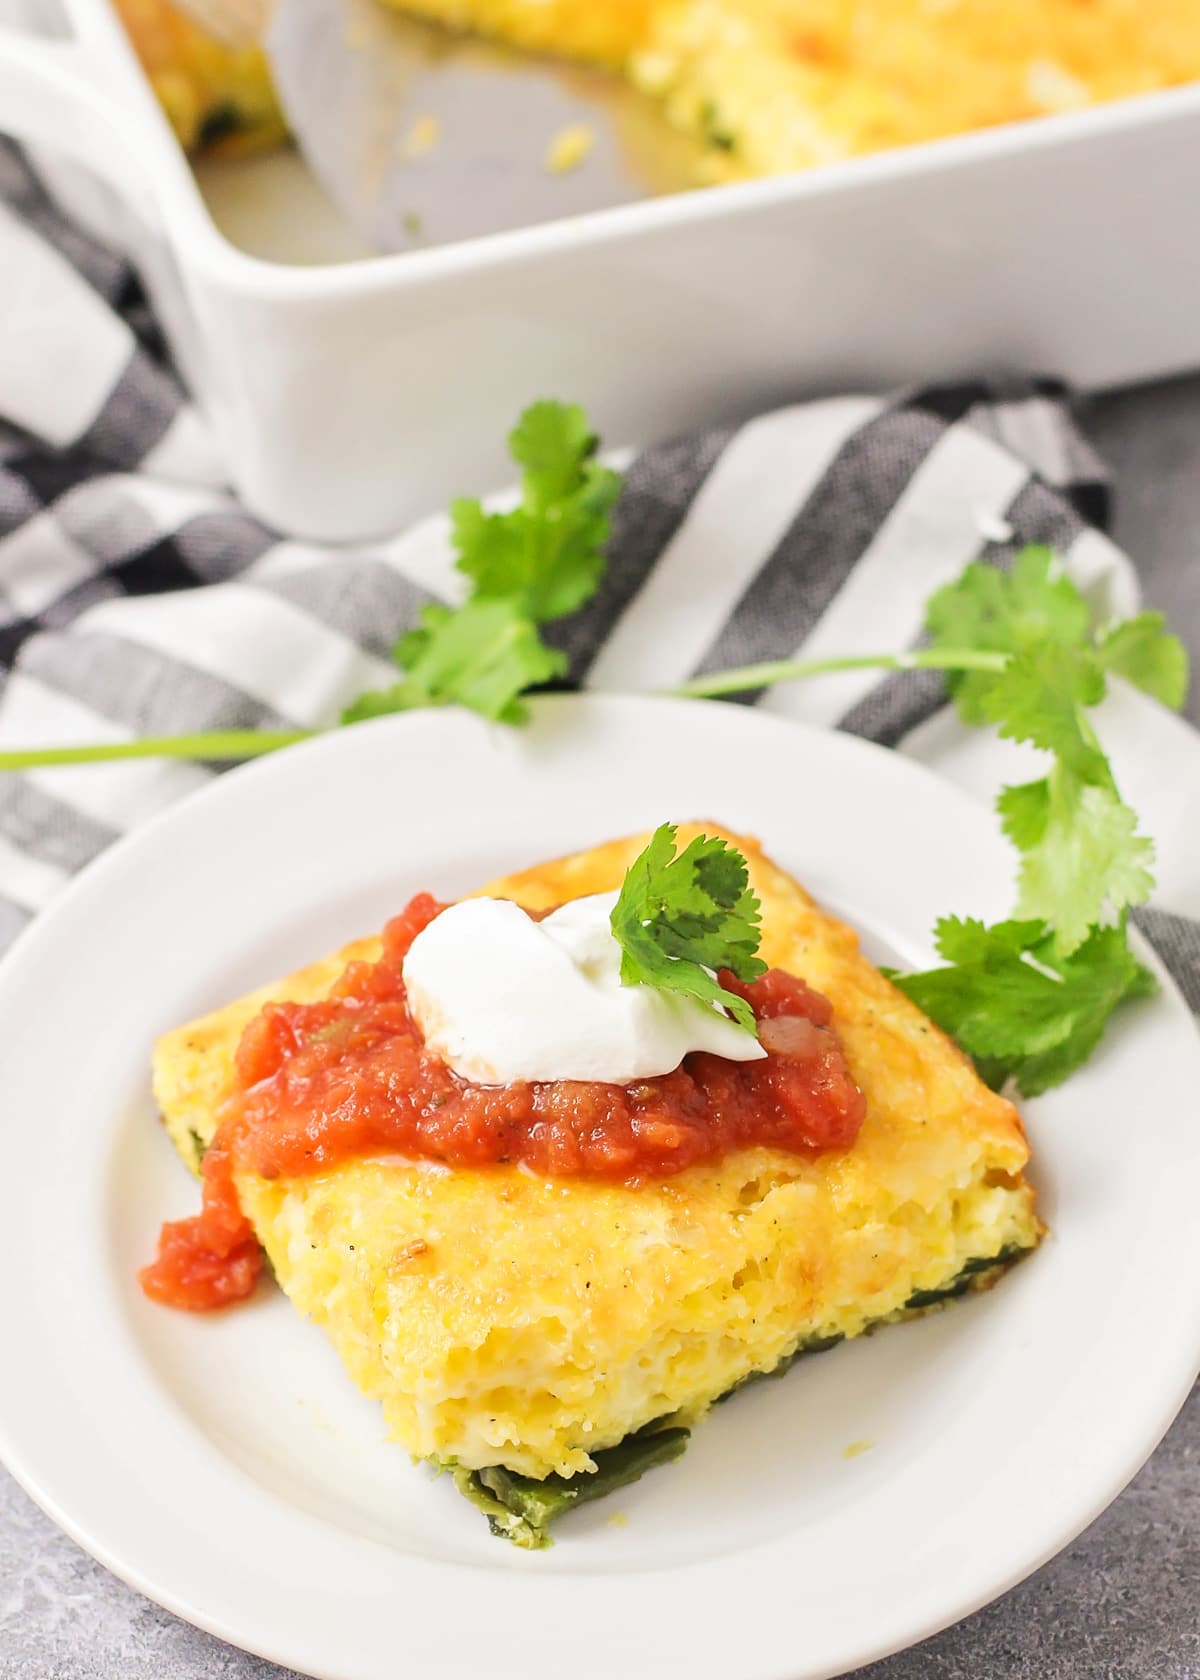 A square slice of chile relleno casserole topped with sour cream and salsa.